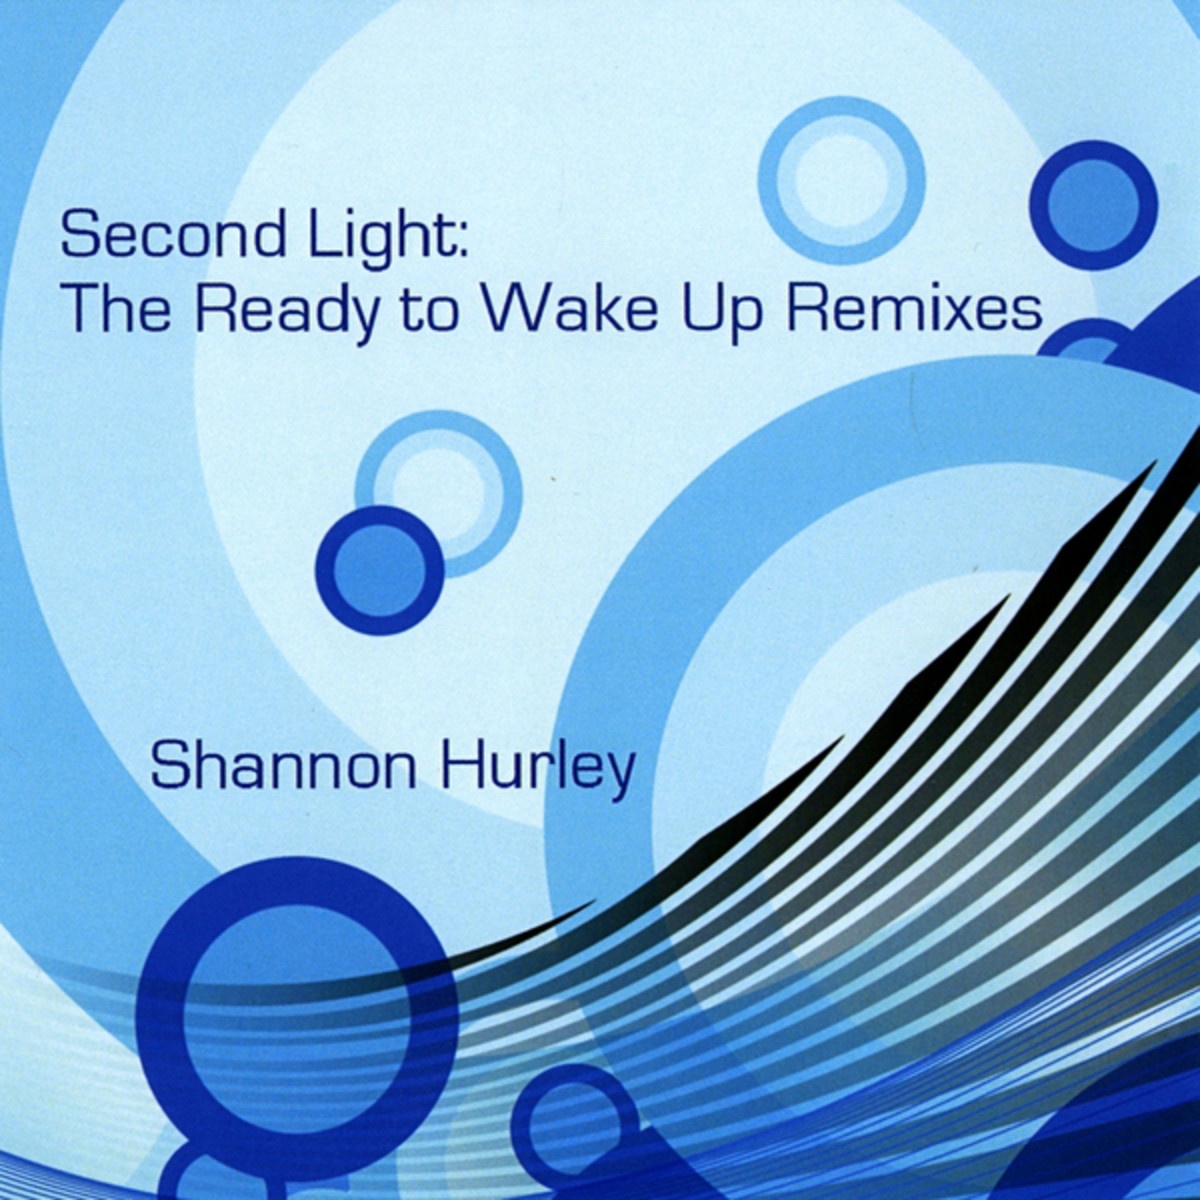 Second Light: The Ready to Wake Up Remixes